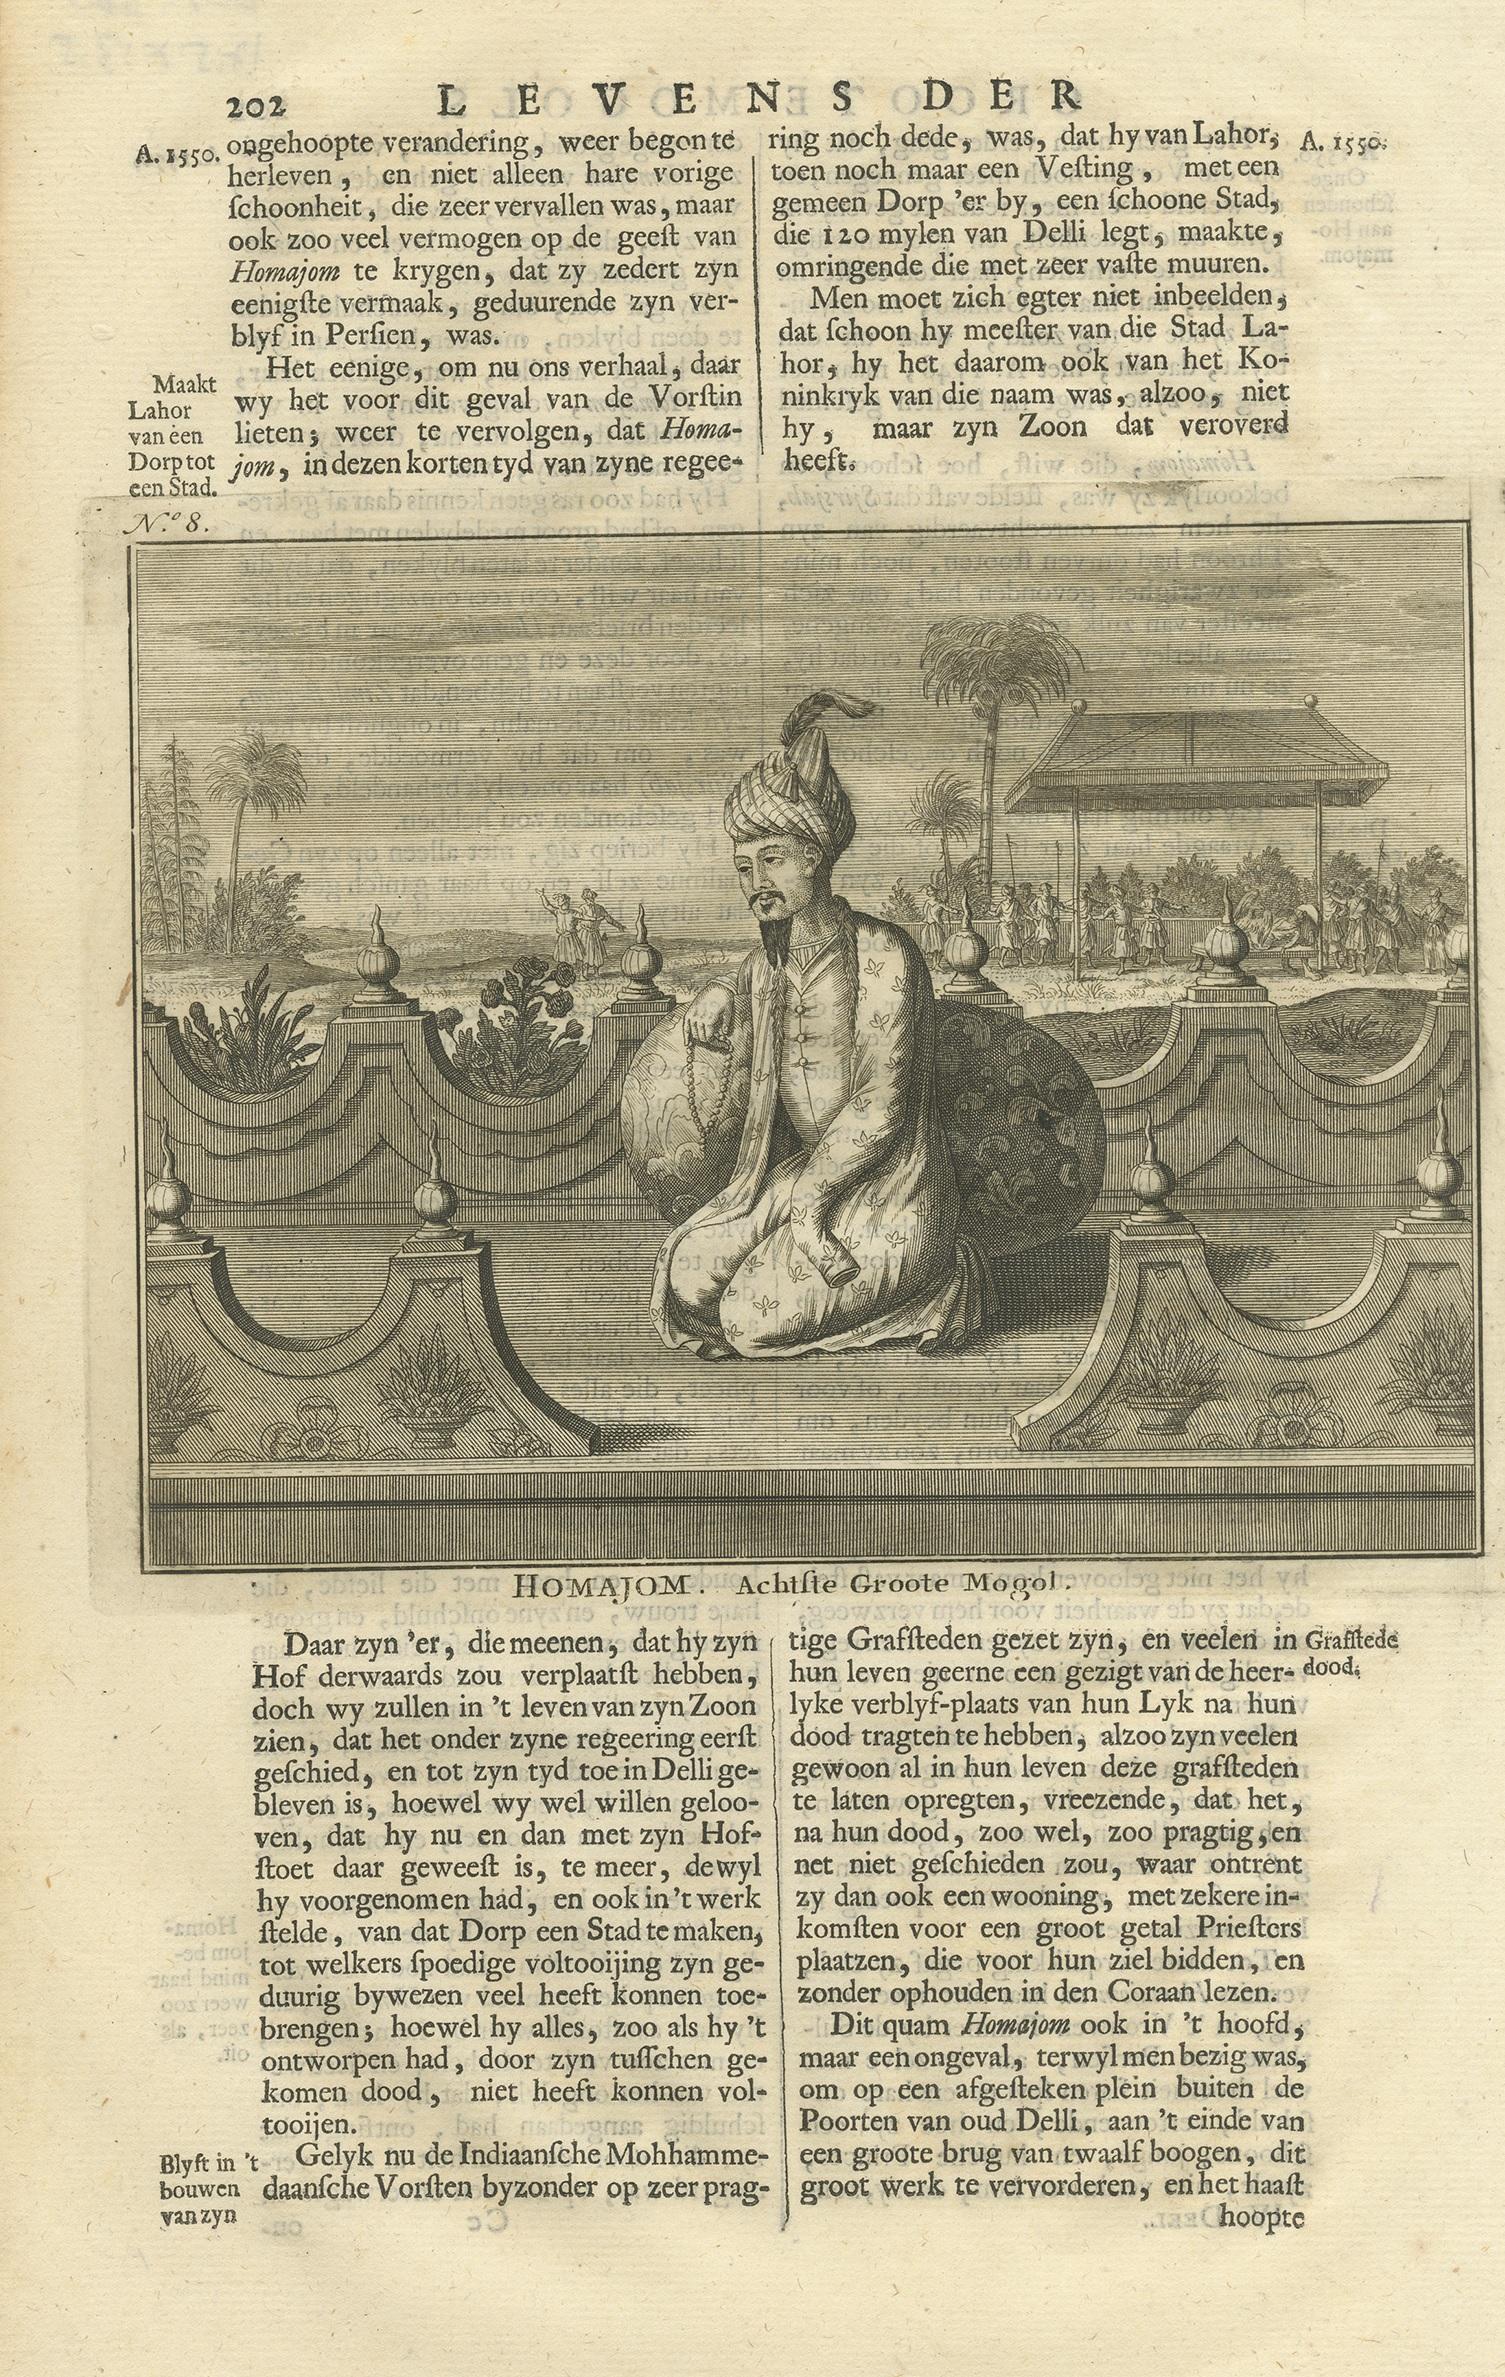 Antique print titled 'Homajom, Achtste Groote Mogol'. This print depicts Jahandar Shah, the 8th Mughal Emperor. Text on verso. This print originates from 'Oud en Nieuw Oost-Indiën' by F. Valentijn.